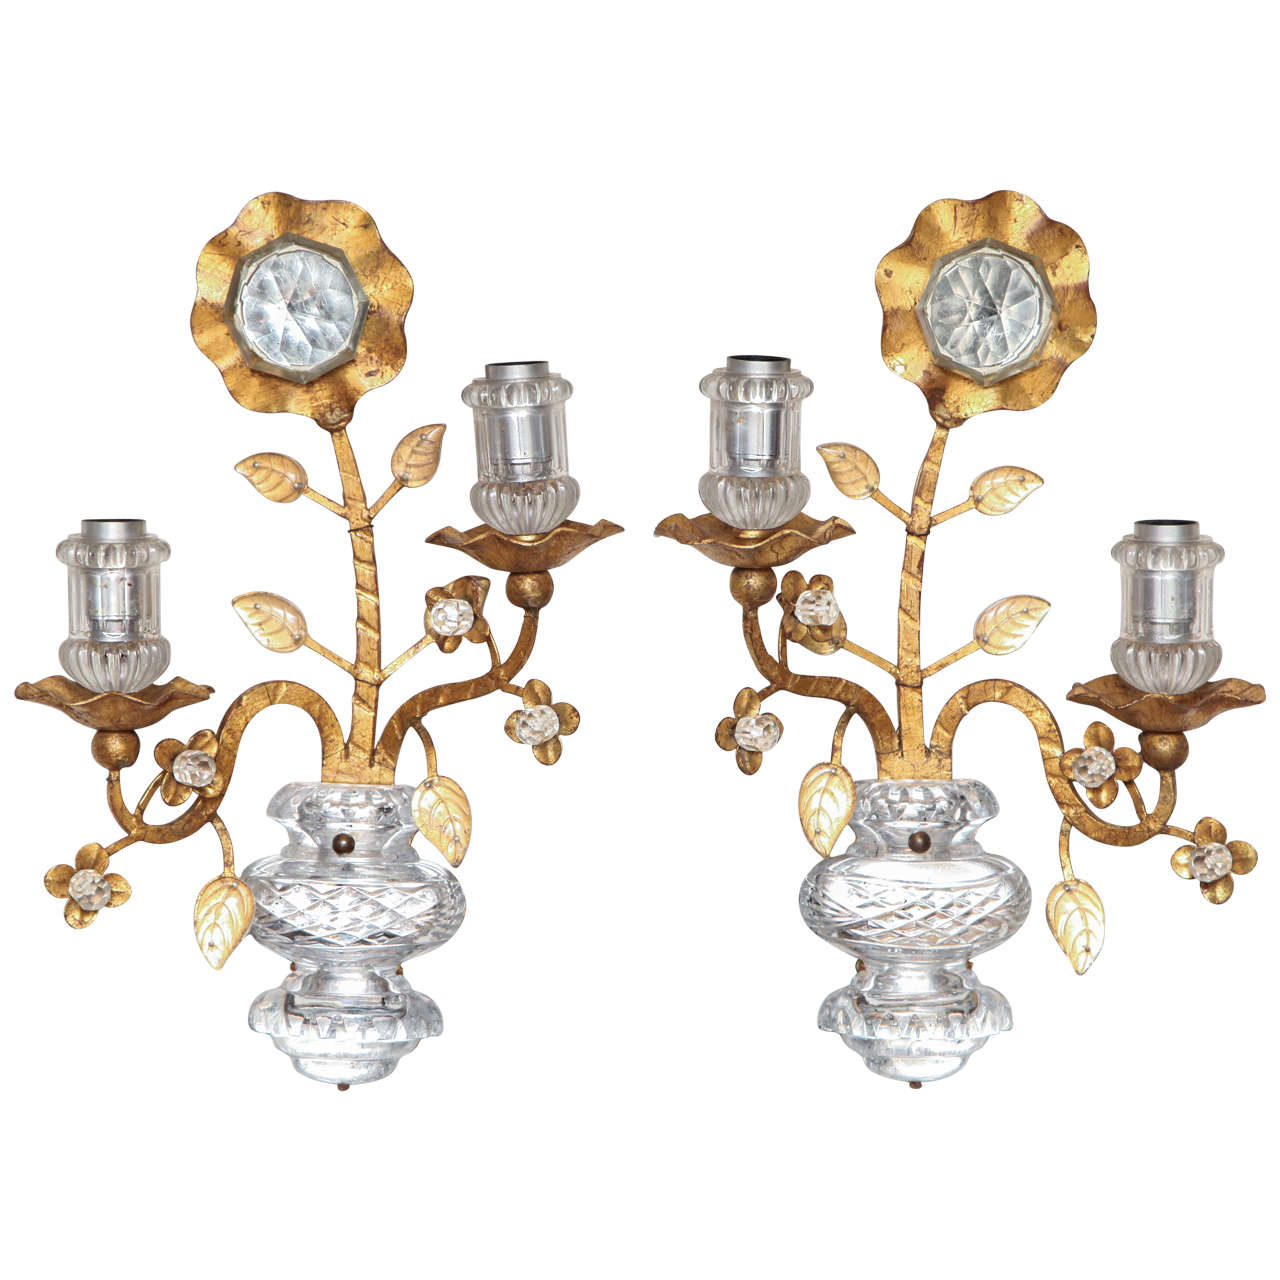 A Pair of Italian Gilt-Metal Sconces by Banci Firenze 